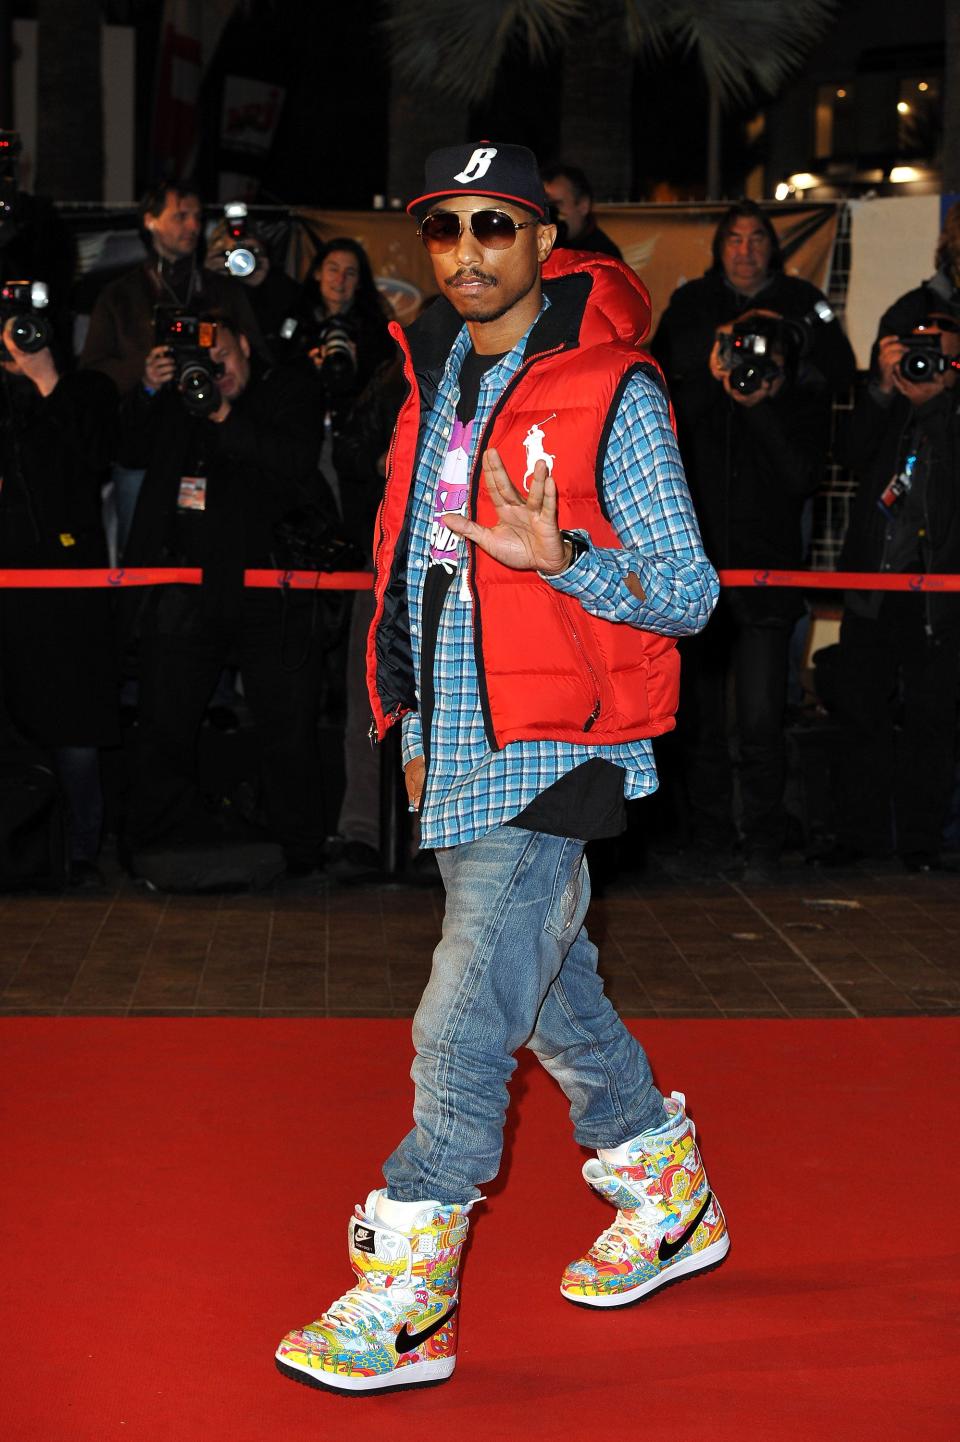 Pharrell Williams attends the NRJ Music Awards 2010 at Palais des Festivals on January 23, 2010 in Cannes, France.